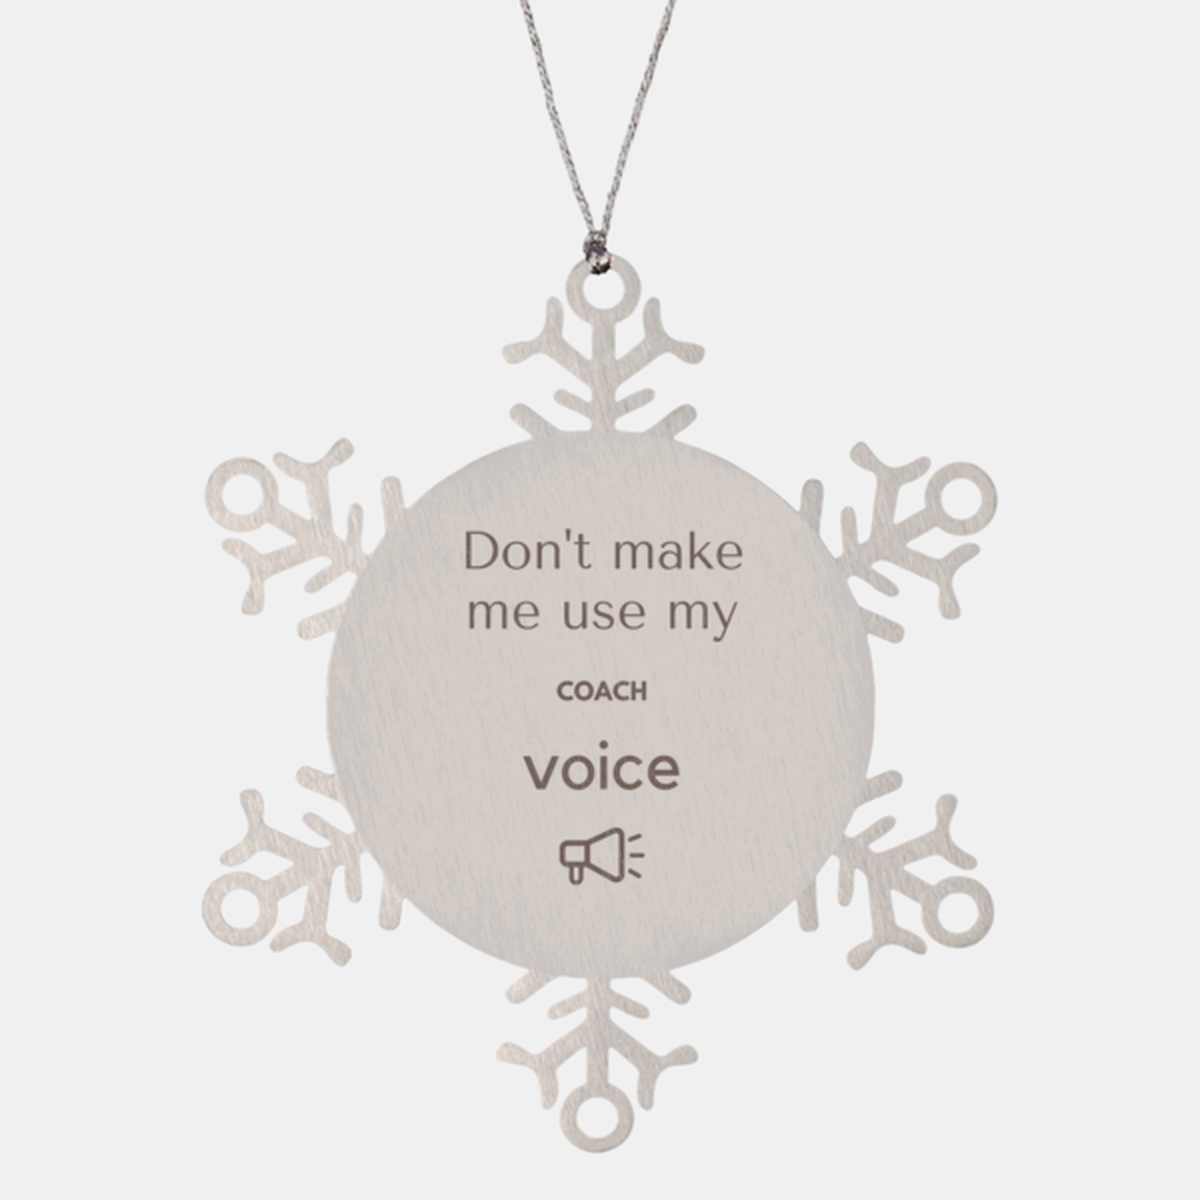 Don't make me use my Coach voice, Sarcasm Coach Ornament Gifts, Christmas Coach Snowflake Ornament Unique Gifts For Coach Coworkers, Men, Women, Colleague, Friends